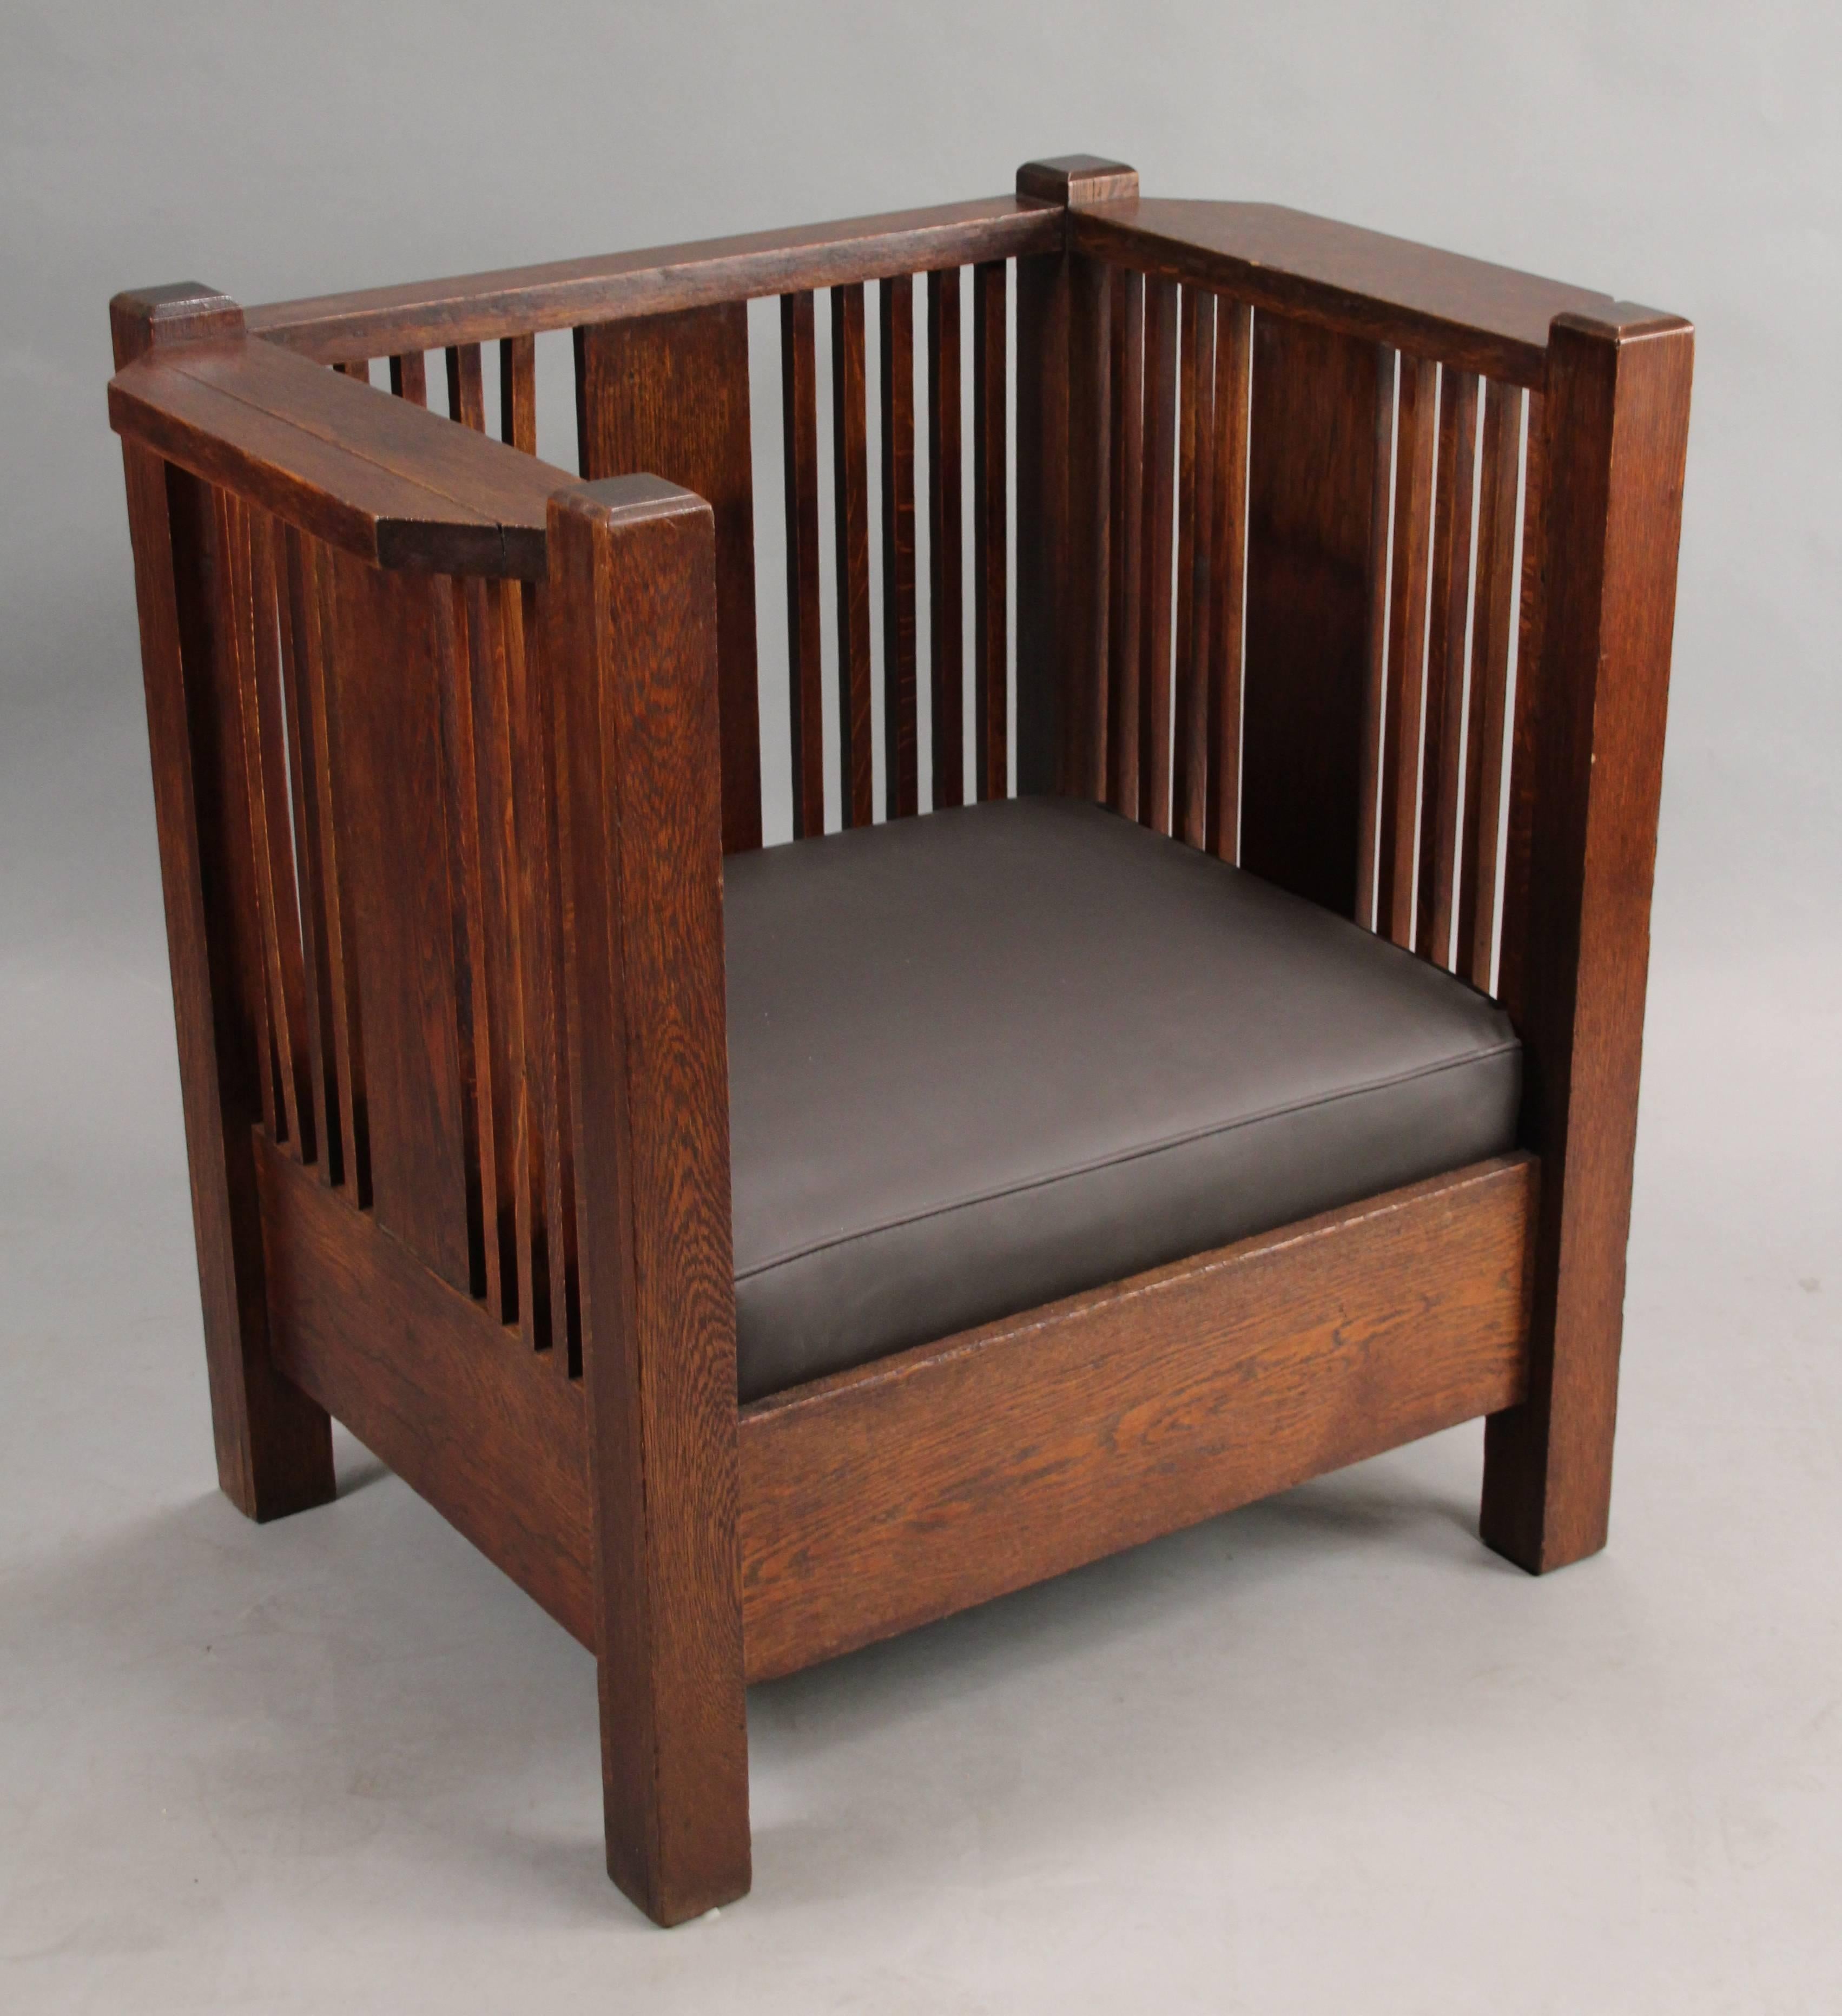 Elegant Arts & Crafts 1910 cube chair with new leather upholstery. The large of spindles on this piece is specific to the Prairie style specific to American Arts & Crafts.